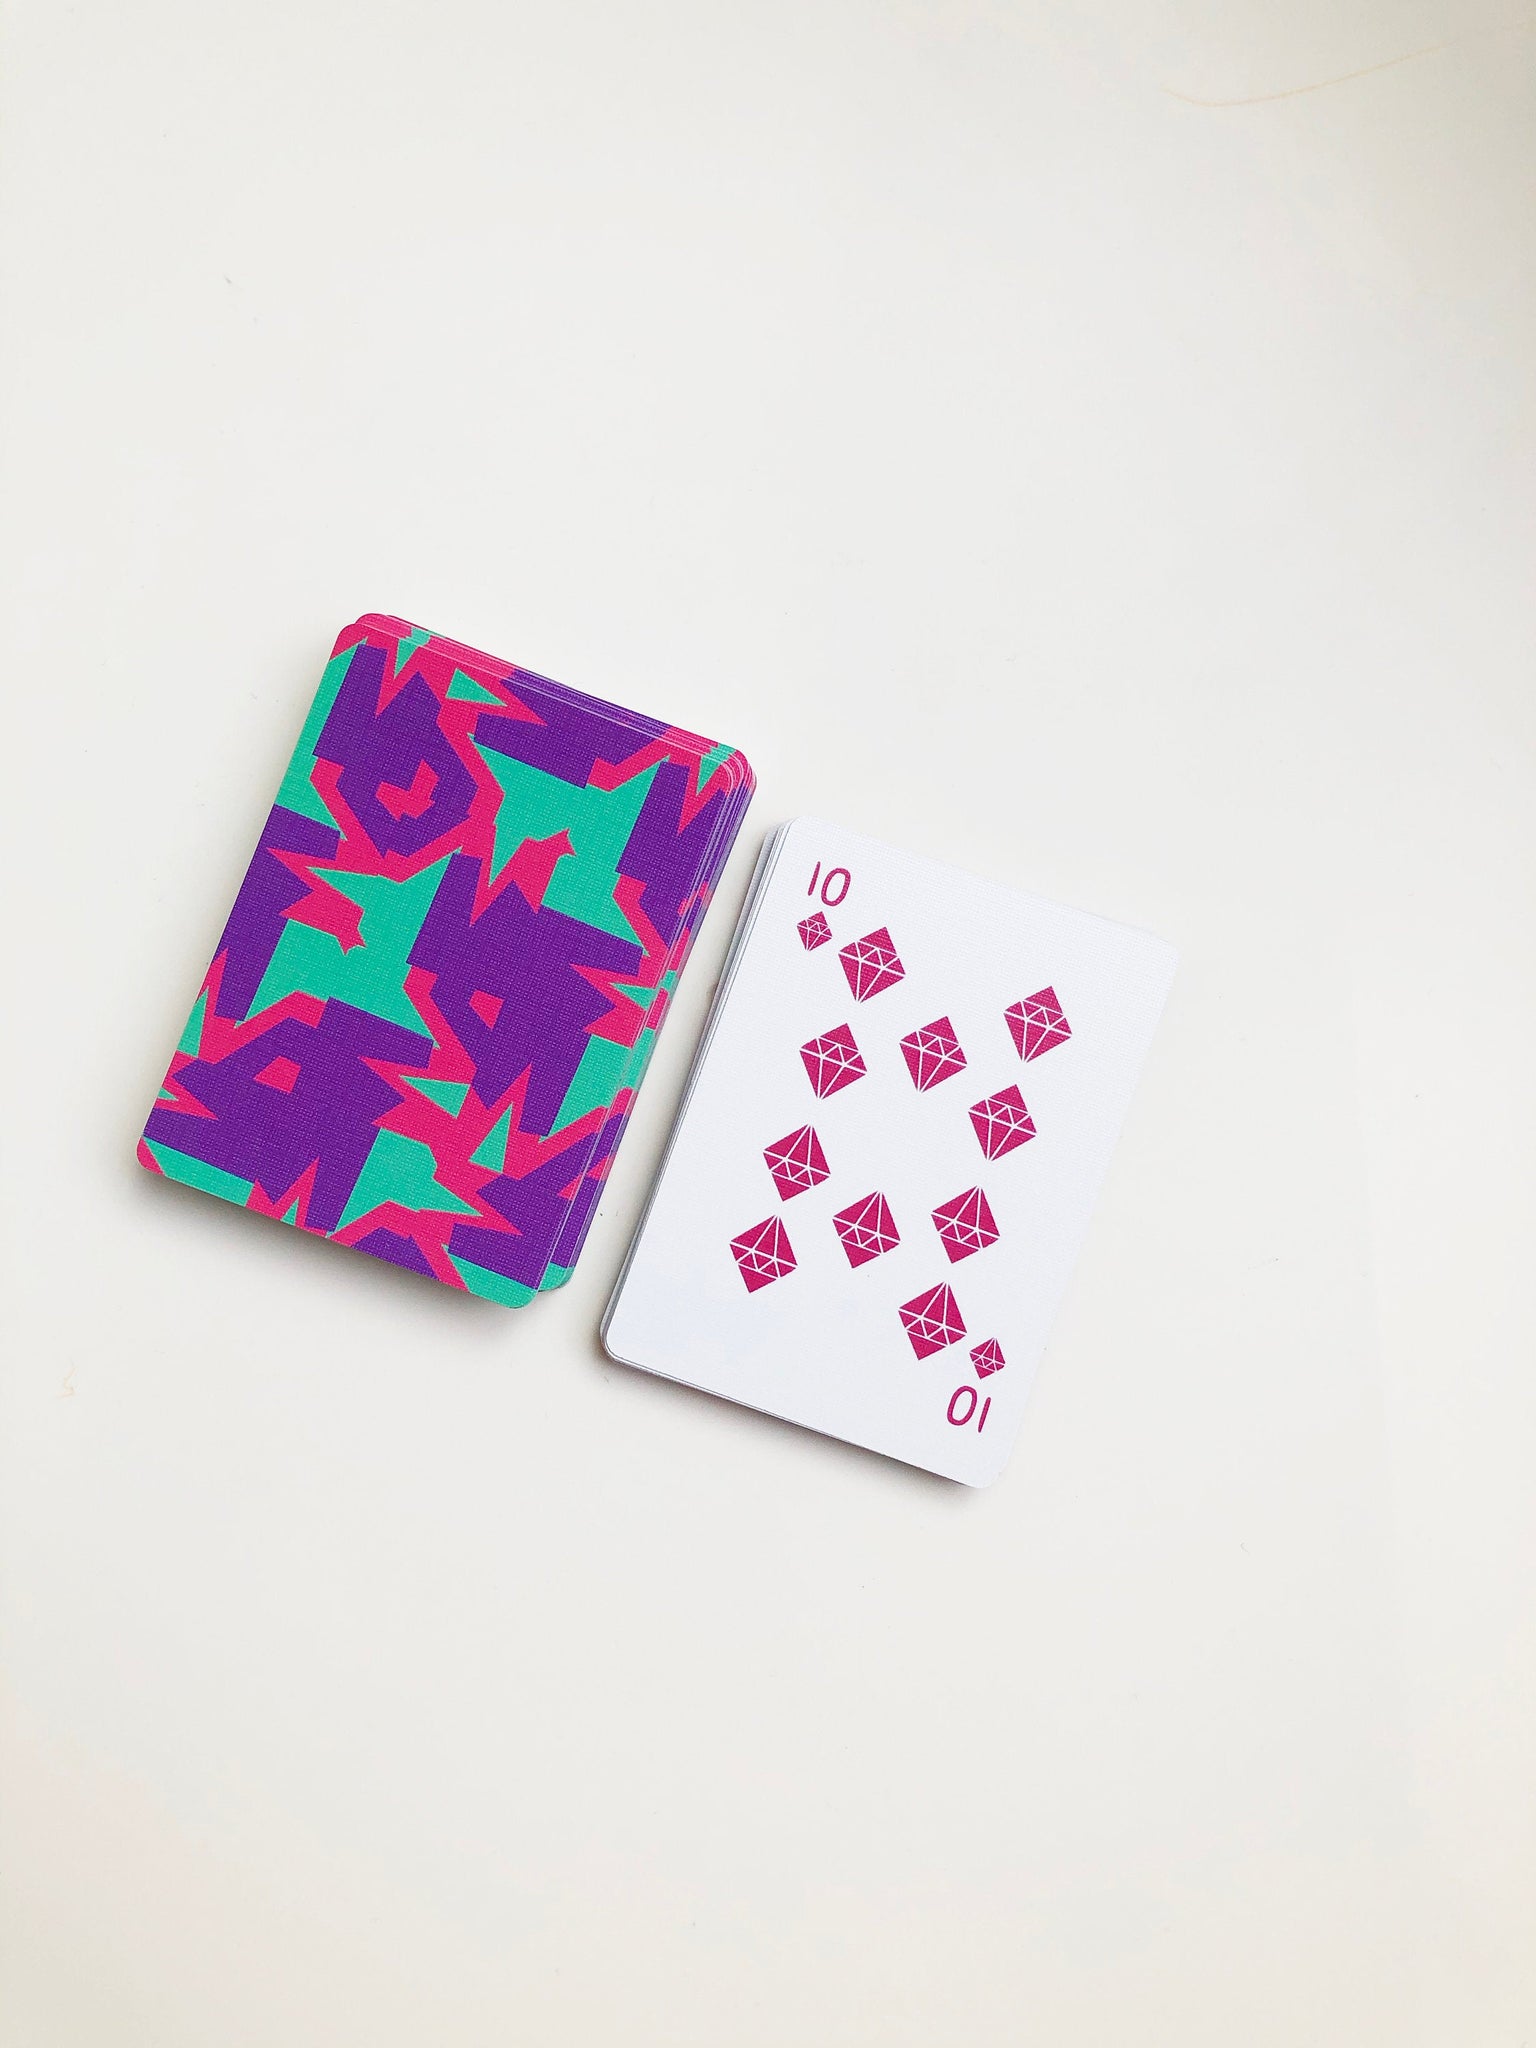 All-Star Limited Edition Playing Cards